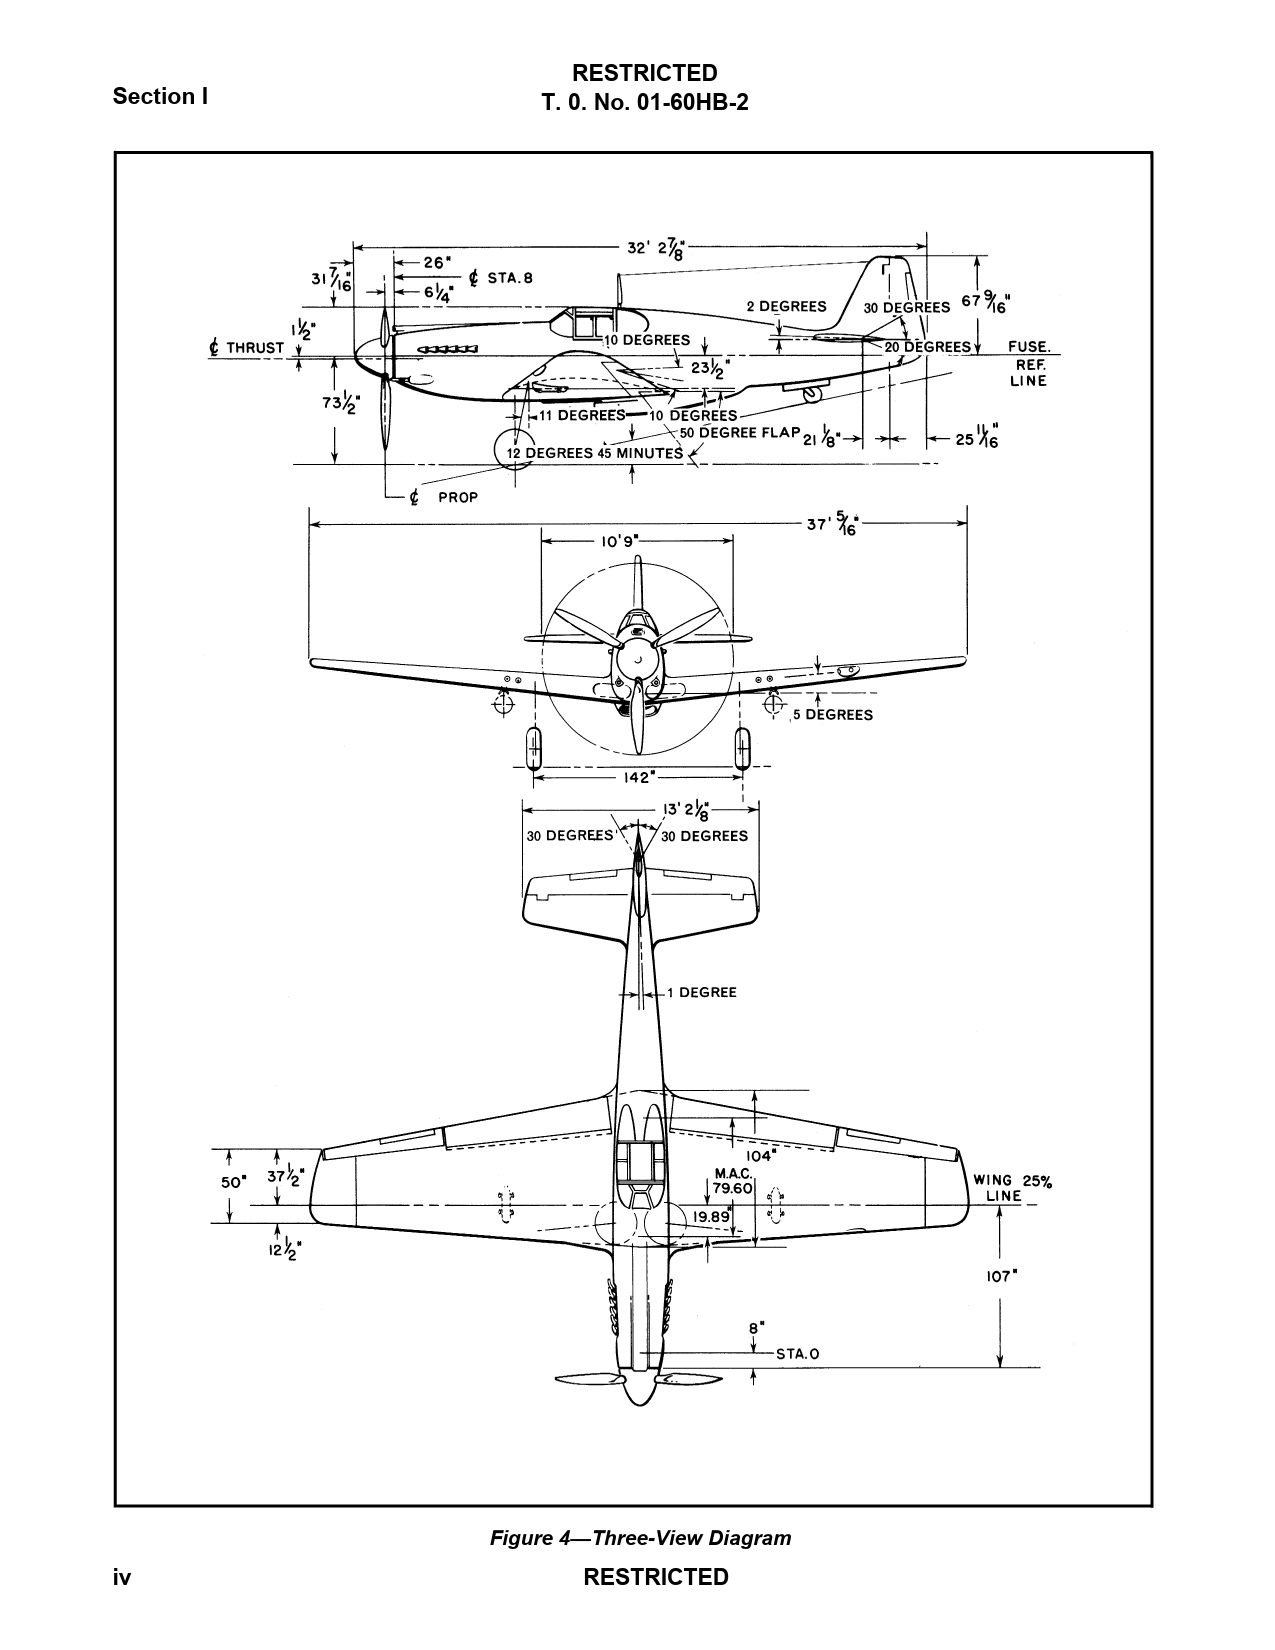 Sample page 6 from AirCorps Library document: Erection and Maintenance Instructions for A-36A